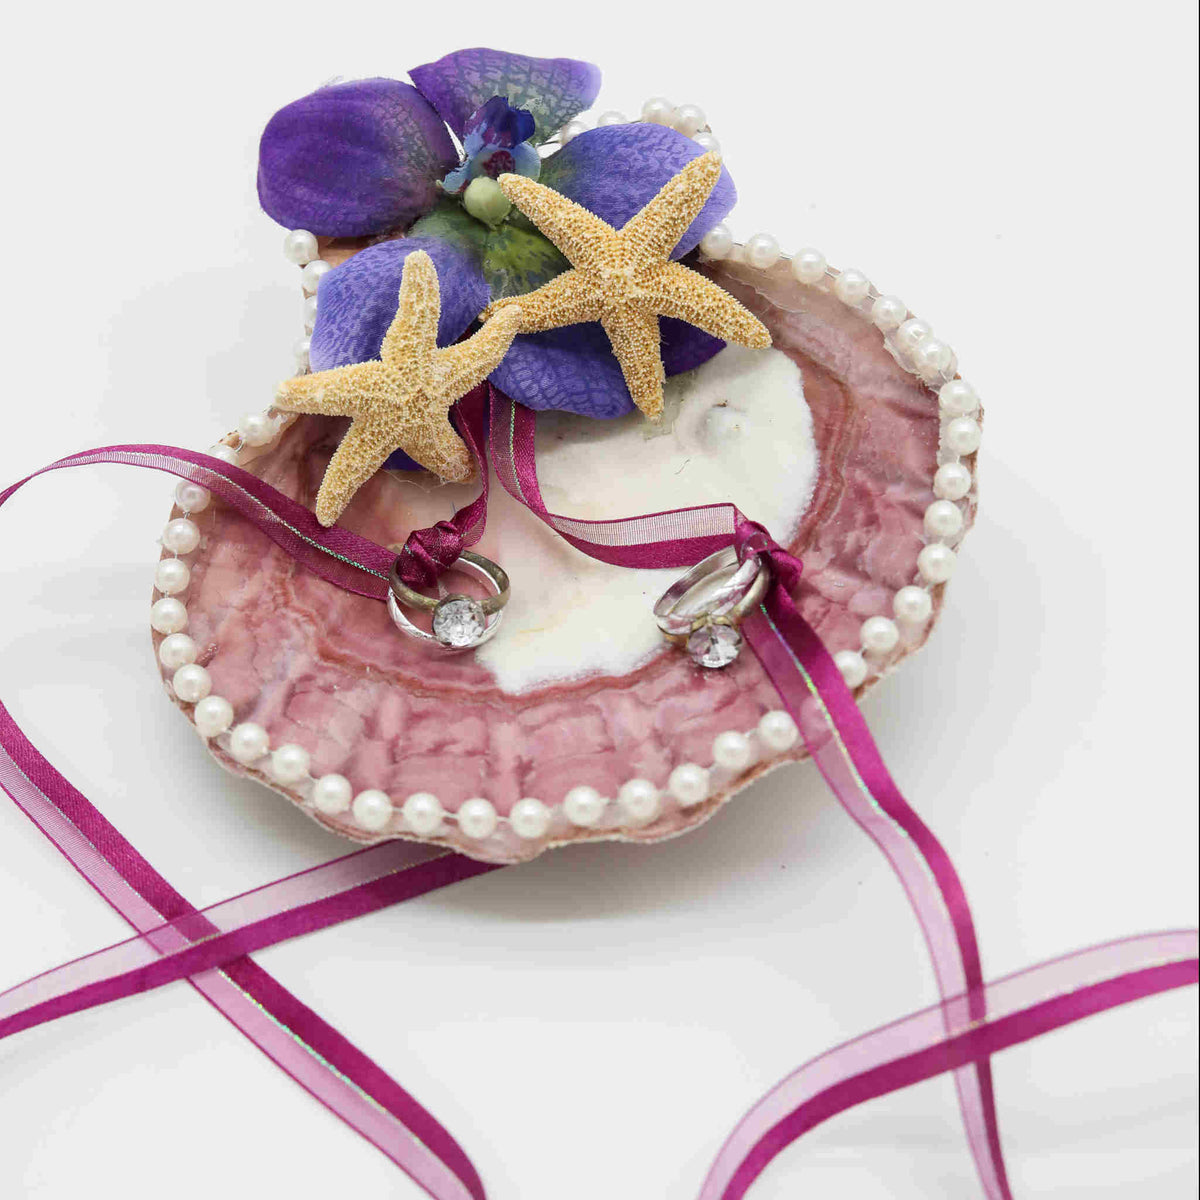 Have your wedding rings brought down the aisle in this beach inspired Scallop Shell Wedding Ring Holder. Made from a large, real shell, and decorated with pearl lace, small starfish, and a beautiful flower, this ring holder will keep your rings secure through a set of matching ribbons as its brought to the altar.